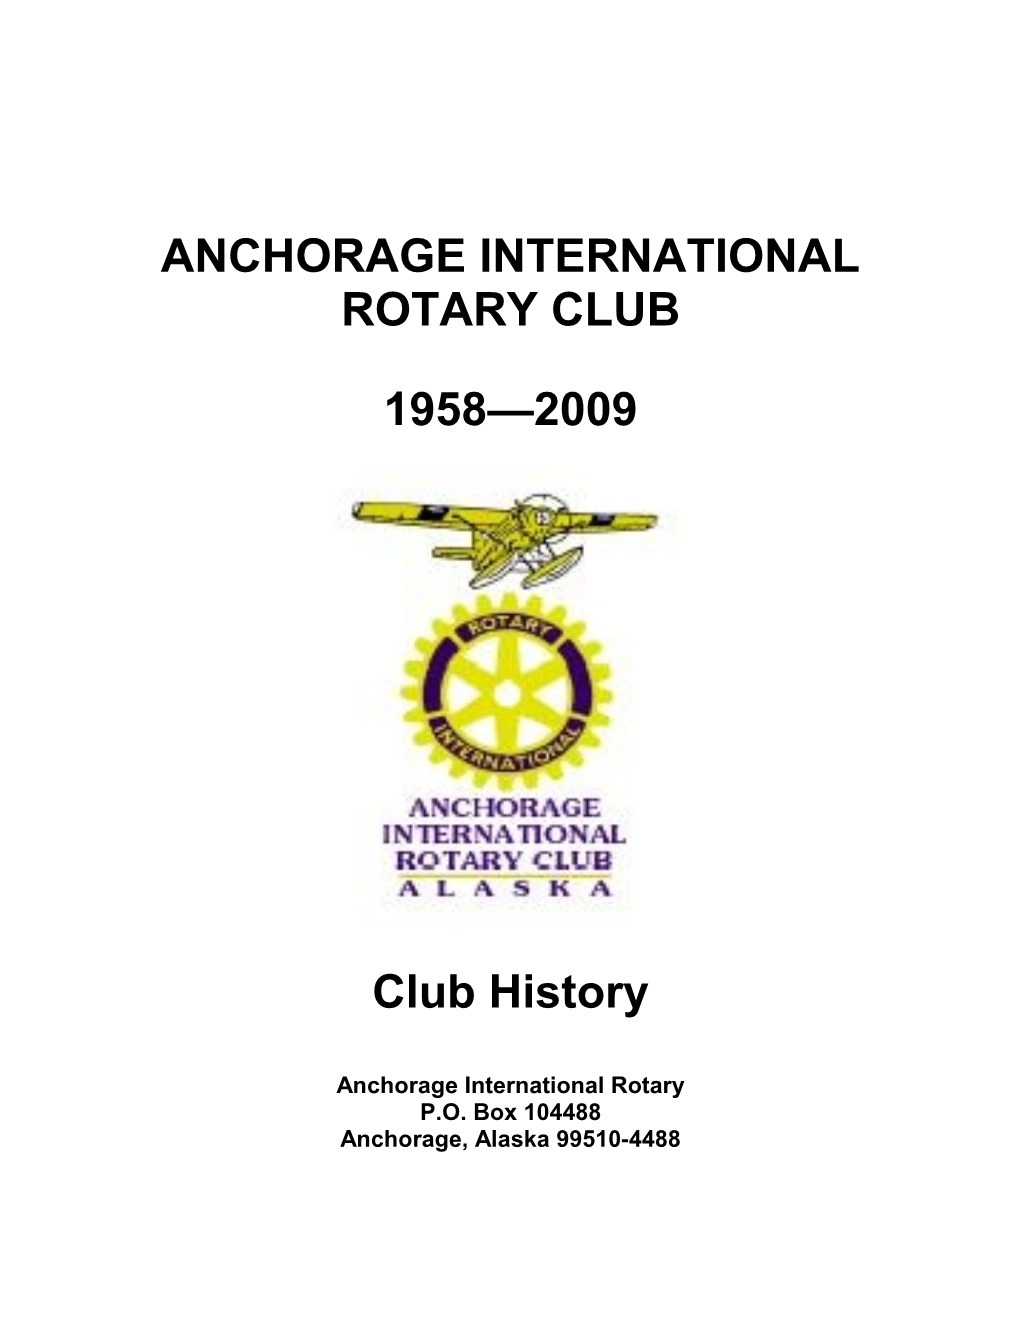 Welcome to the Anchorage International Rotary Club